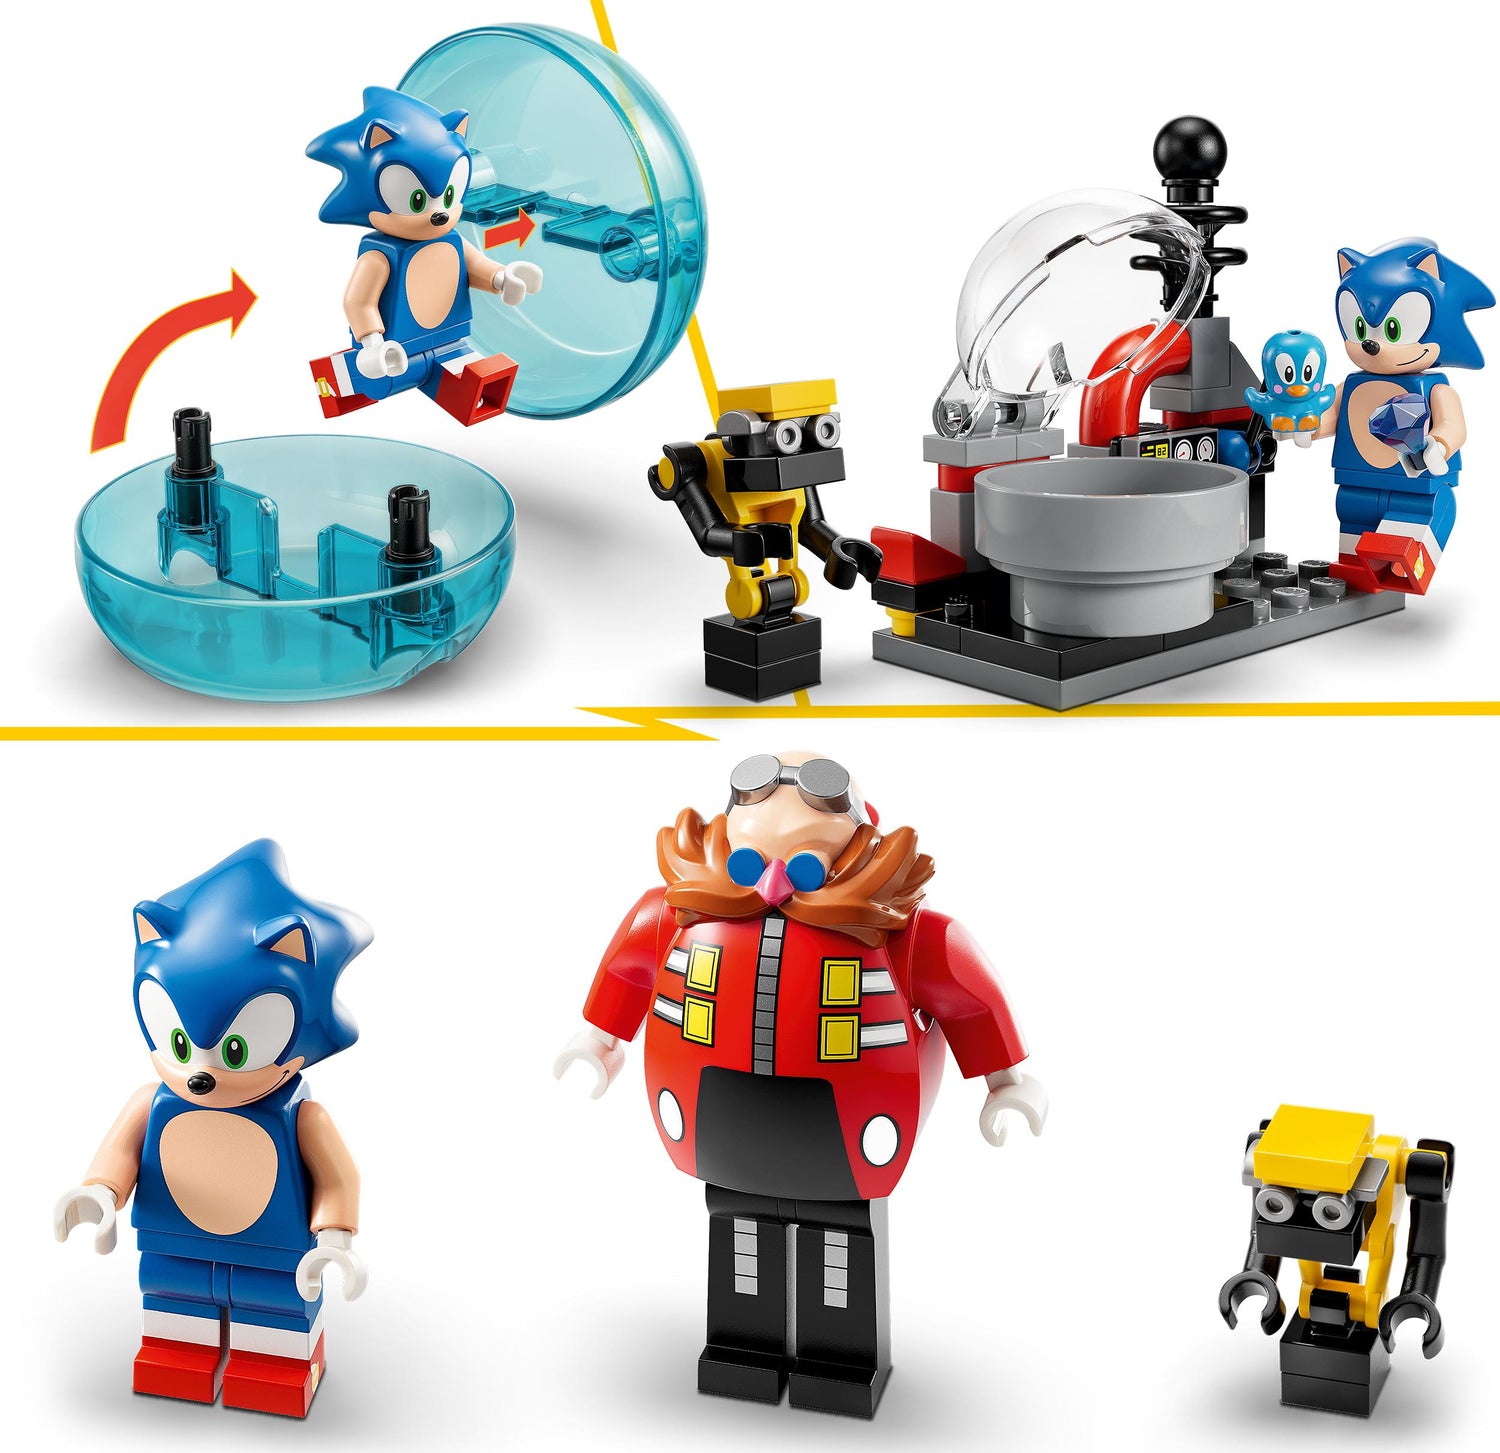 Lego's Sonic the Hedgehog set release date and price announced